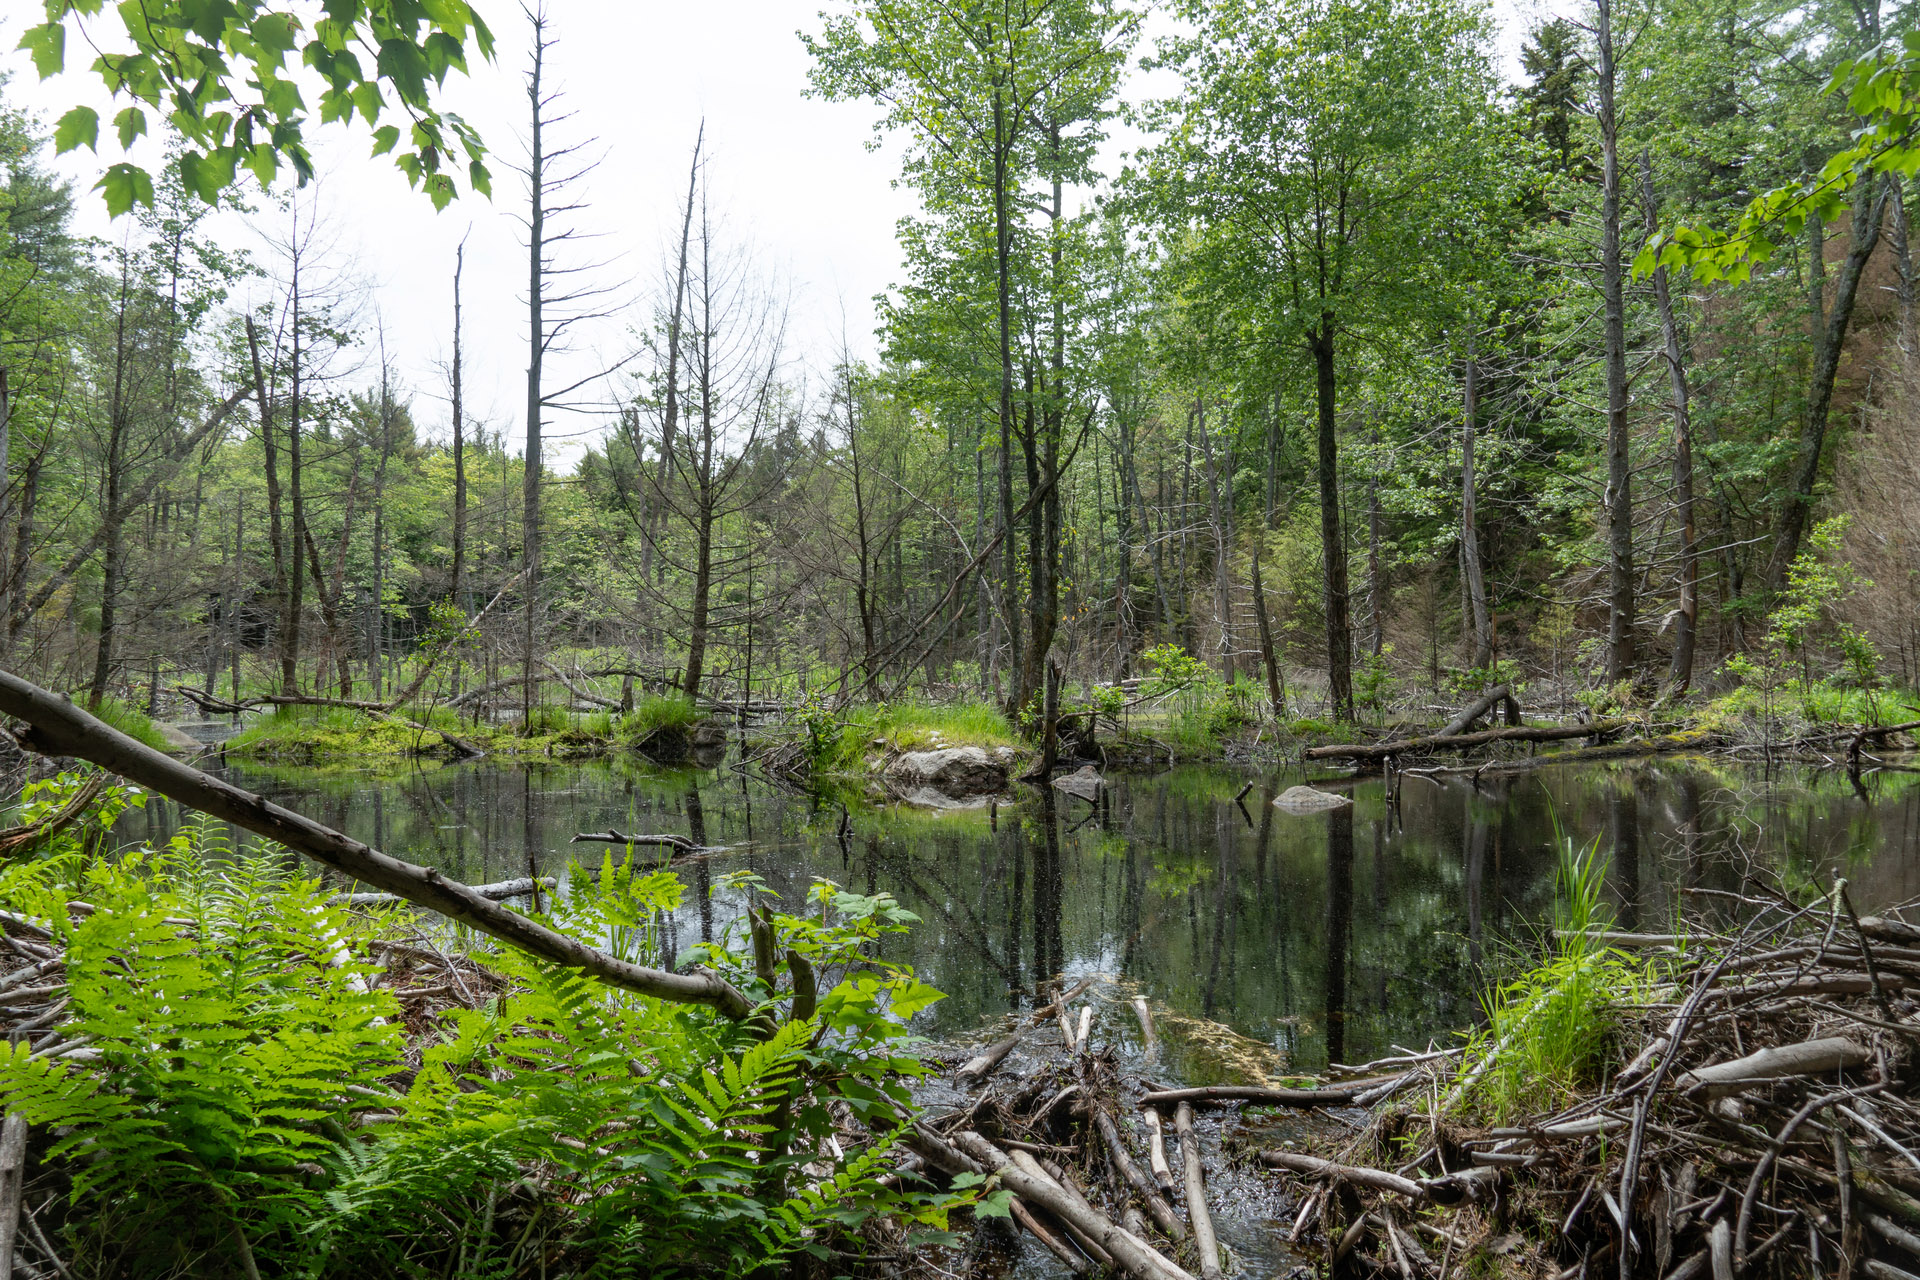 Swampy wetlands with logs and ferns in the bank. Tall, bare tree trunks stand throughout the wetland.